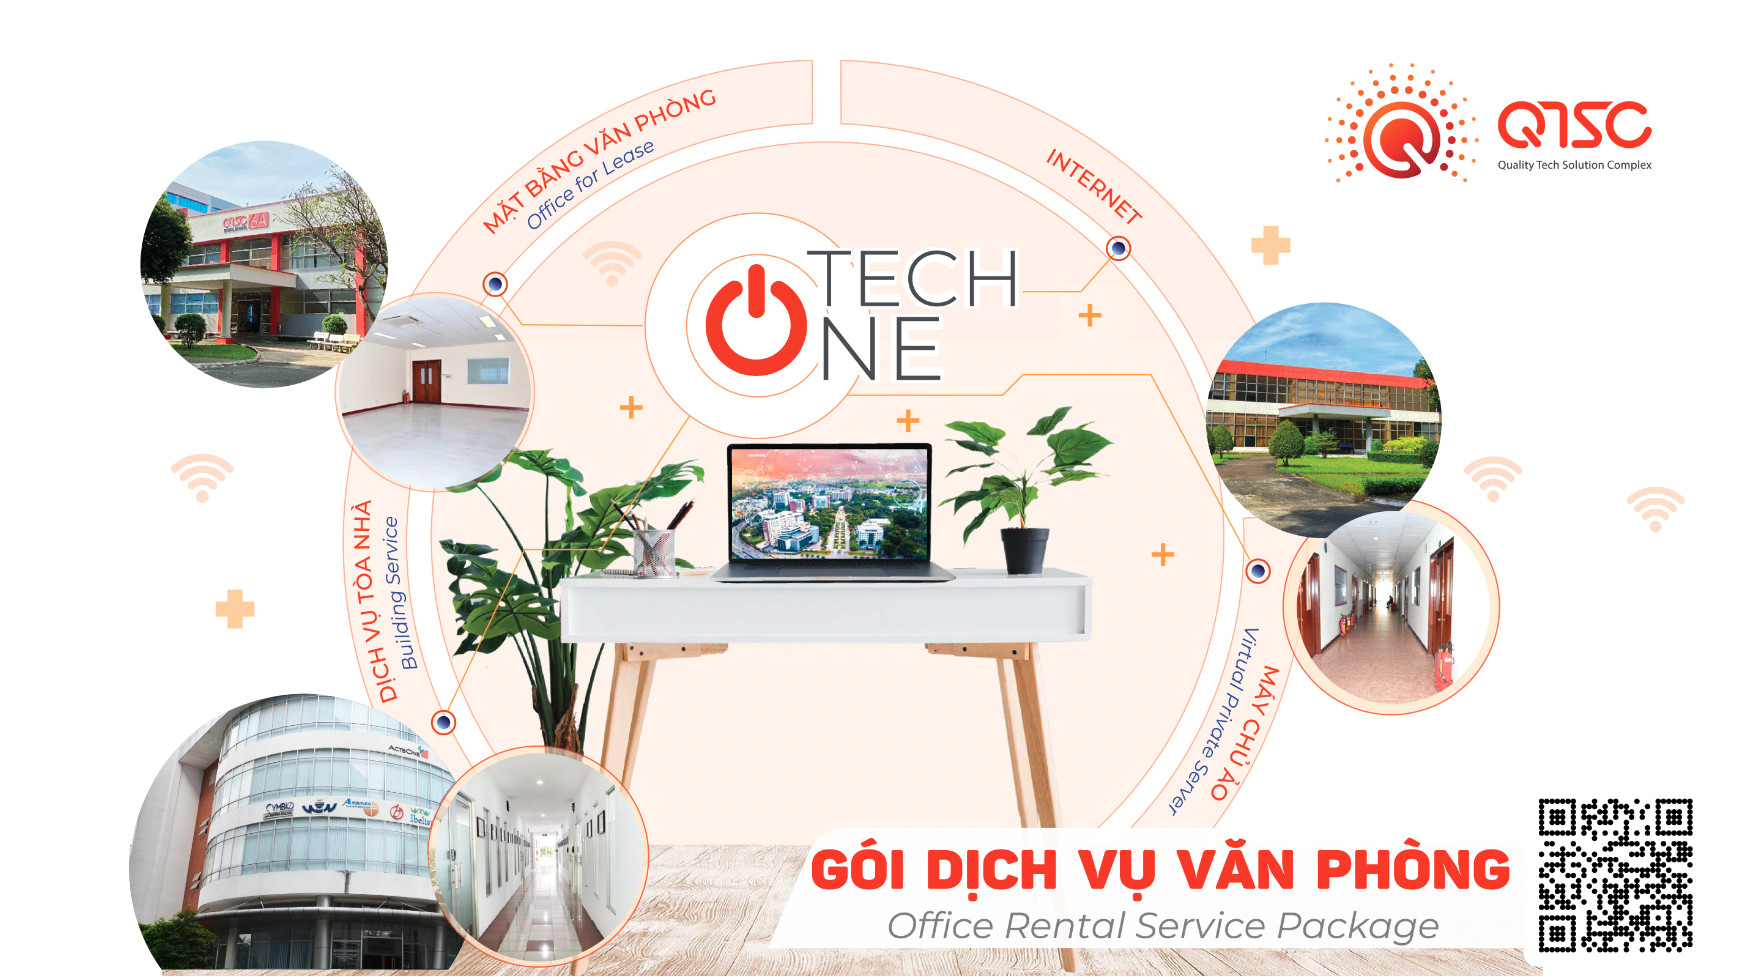 QTSC provides the TECH ONE telecommunications service integrated office product package